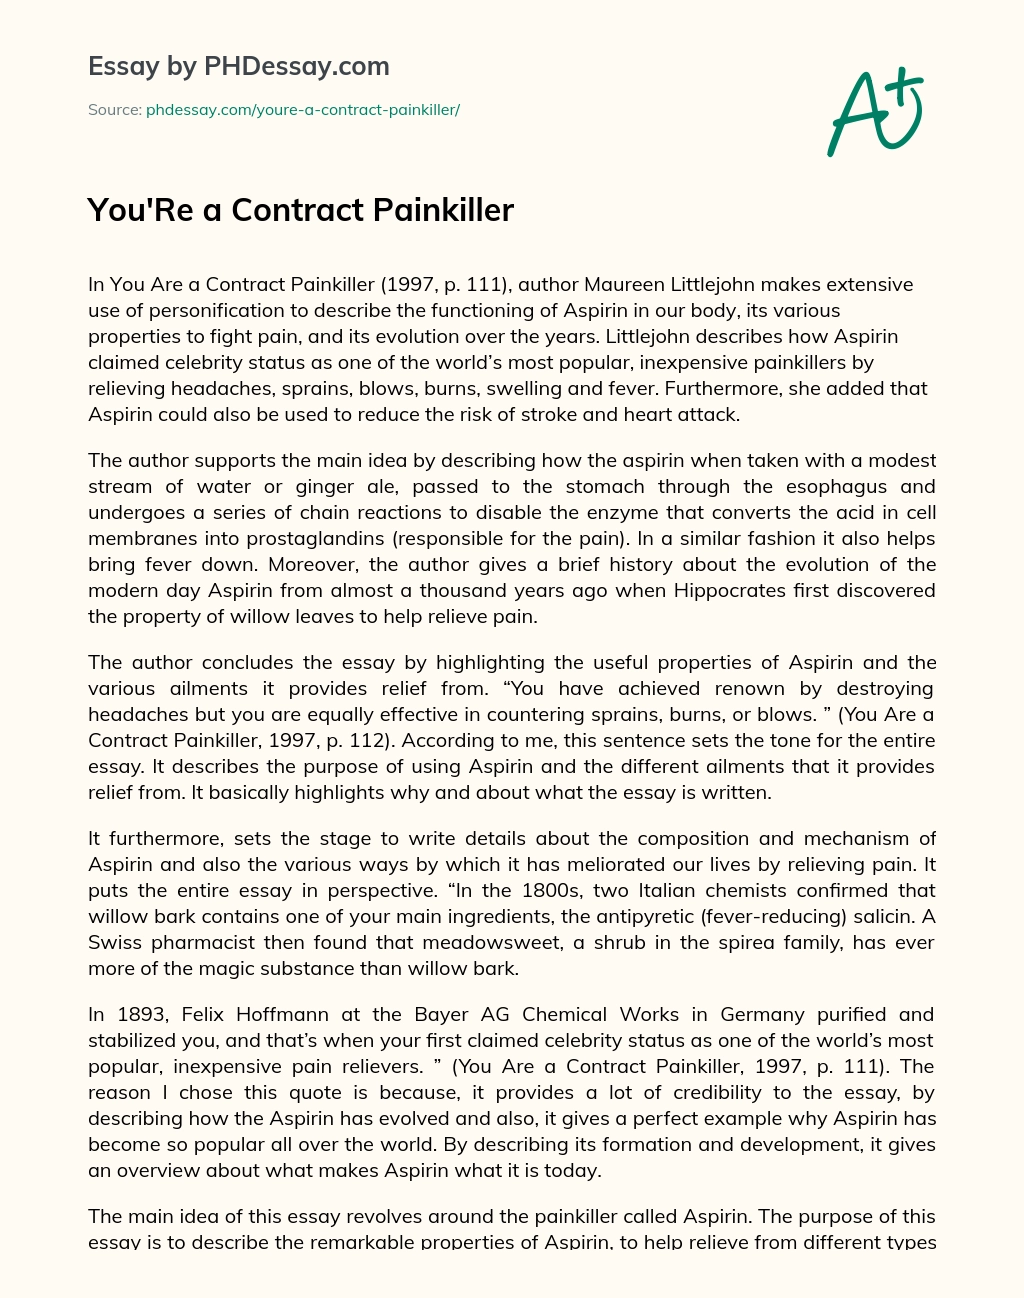 You’Re a Contract Painkiller essay